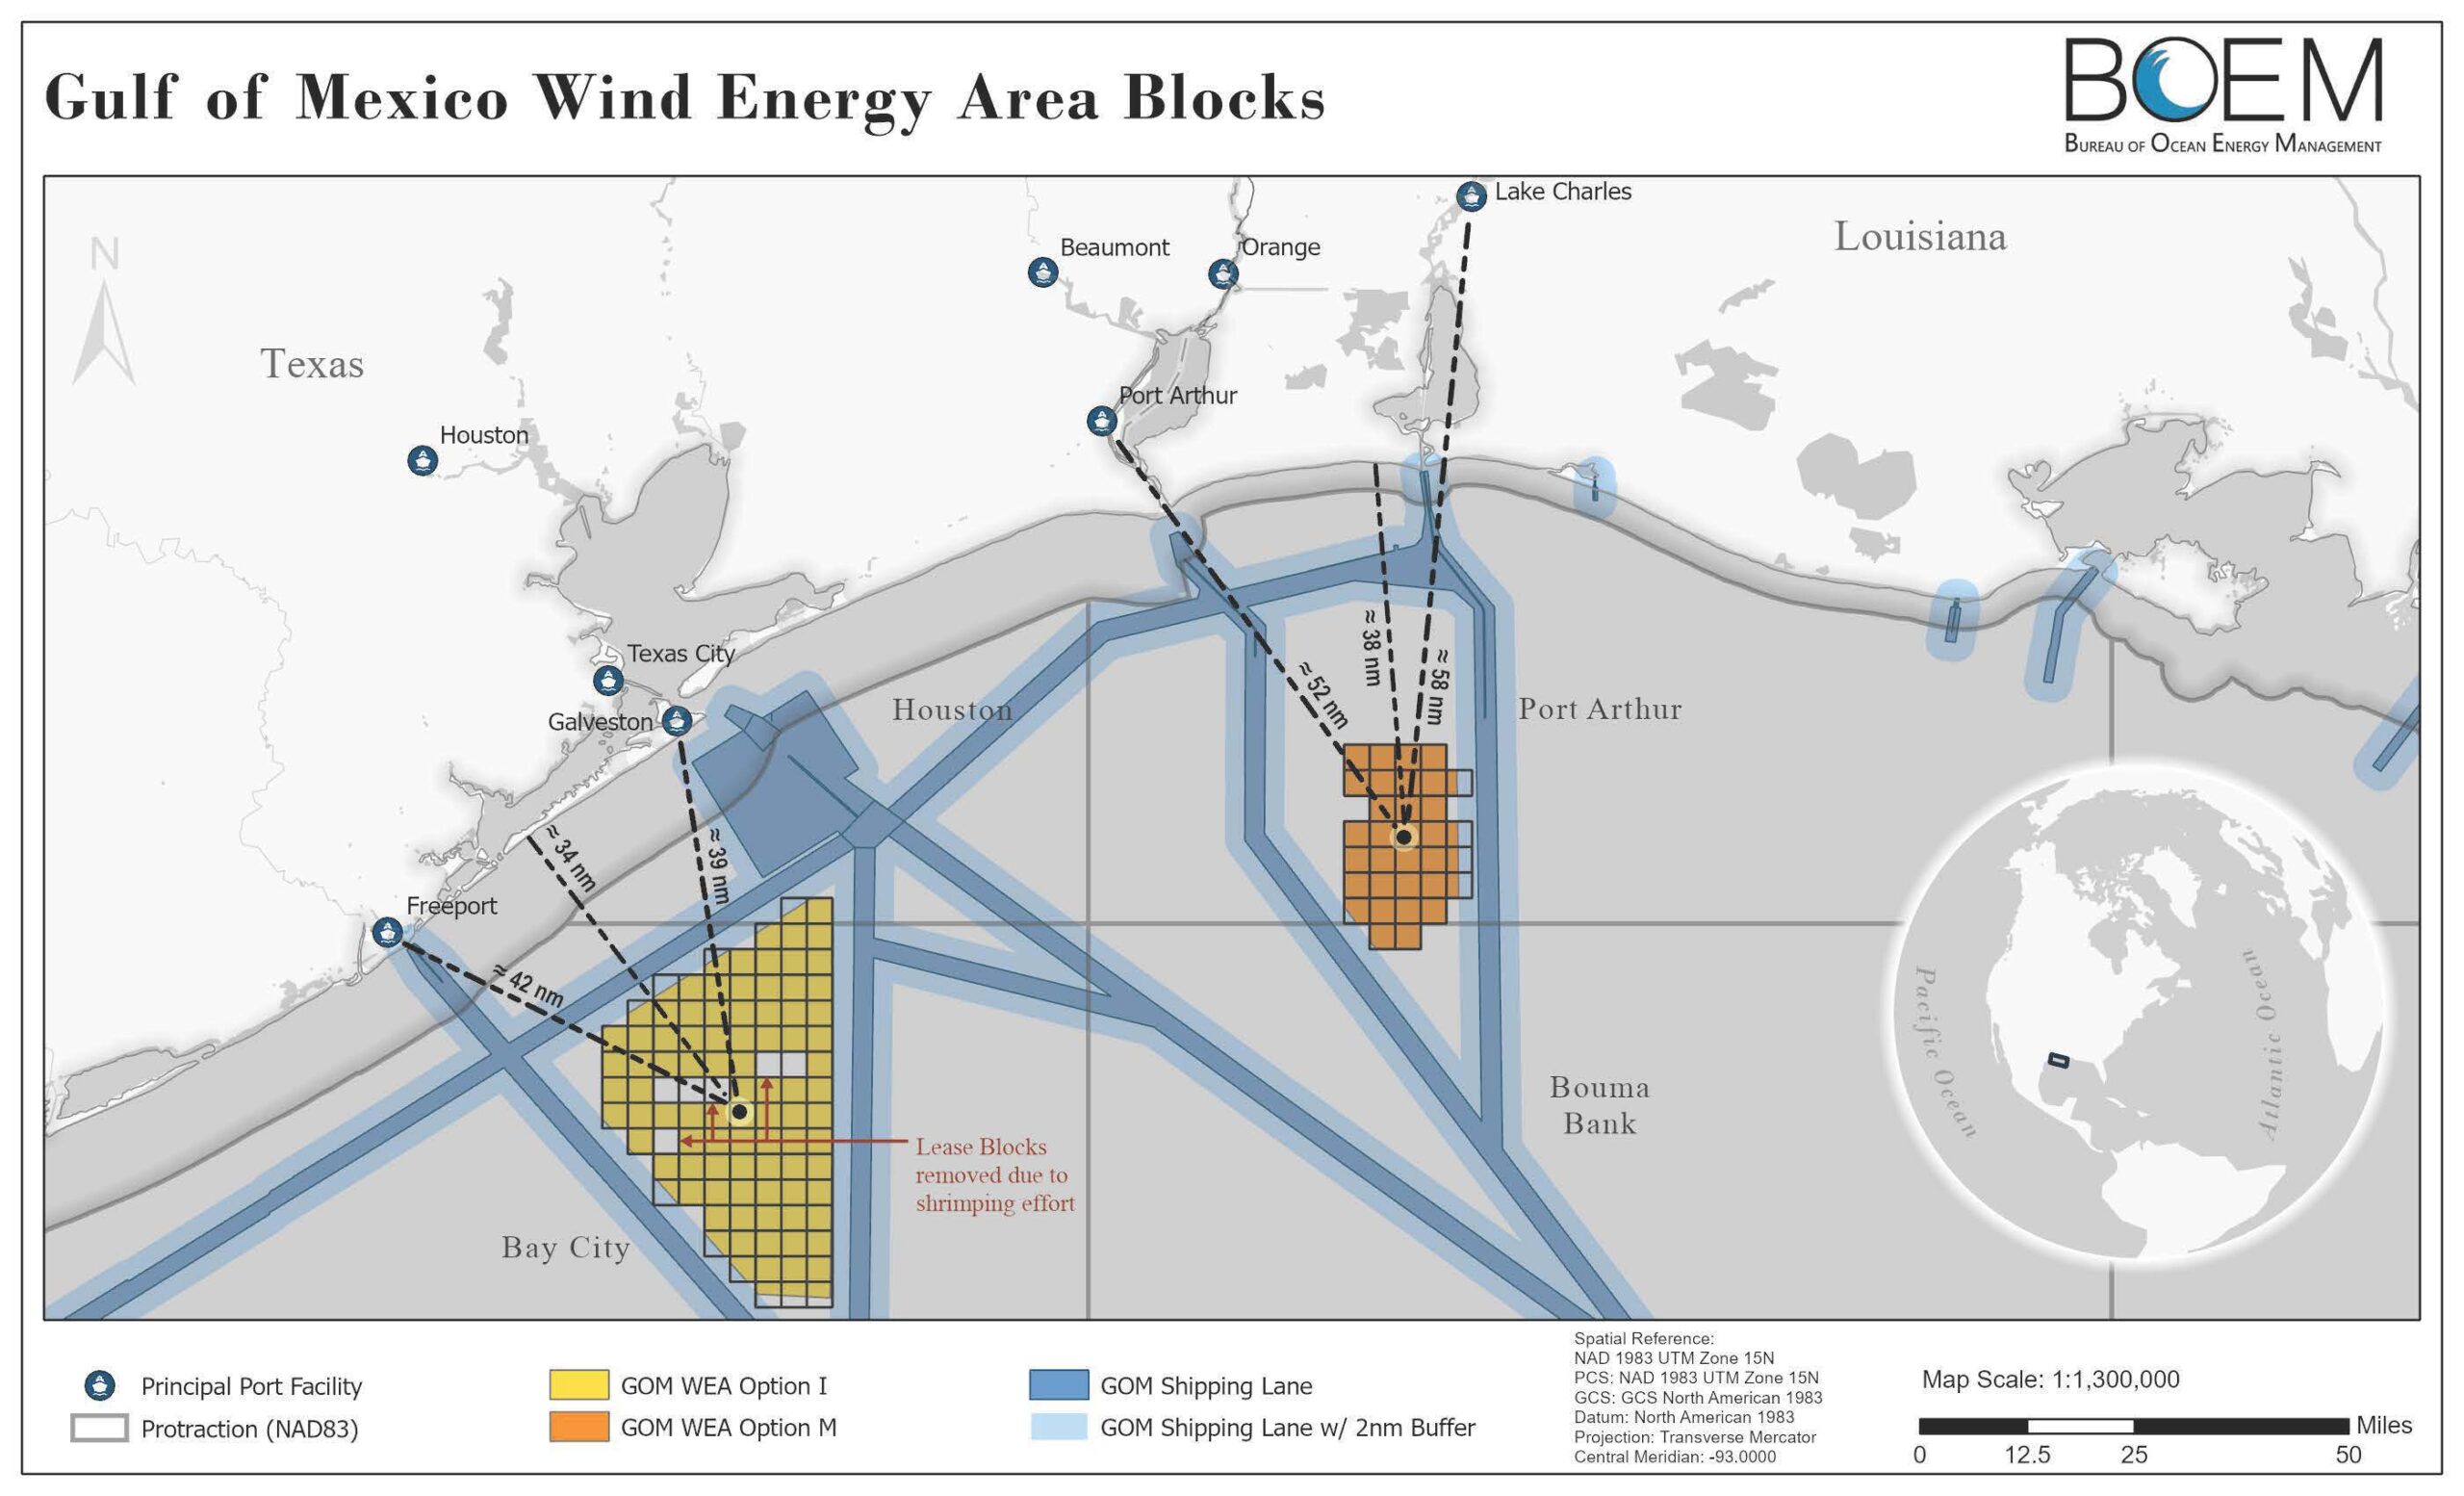 Map showing location of Wind Energy Area lease blocks off the coasts of Texas and Louisiana.